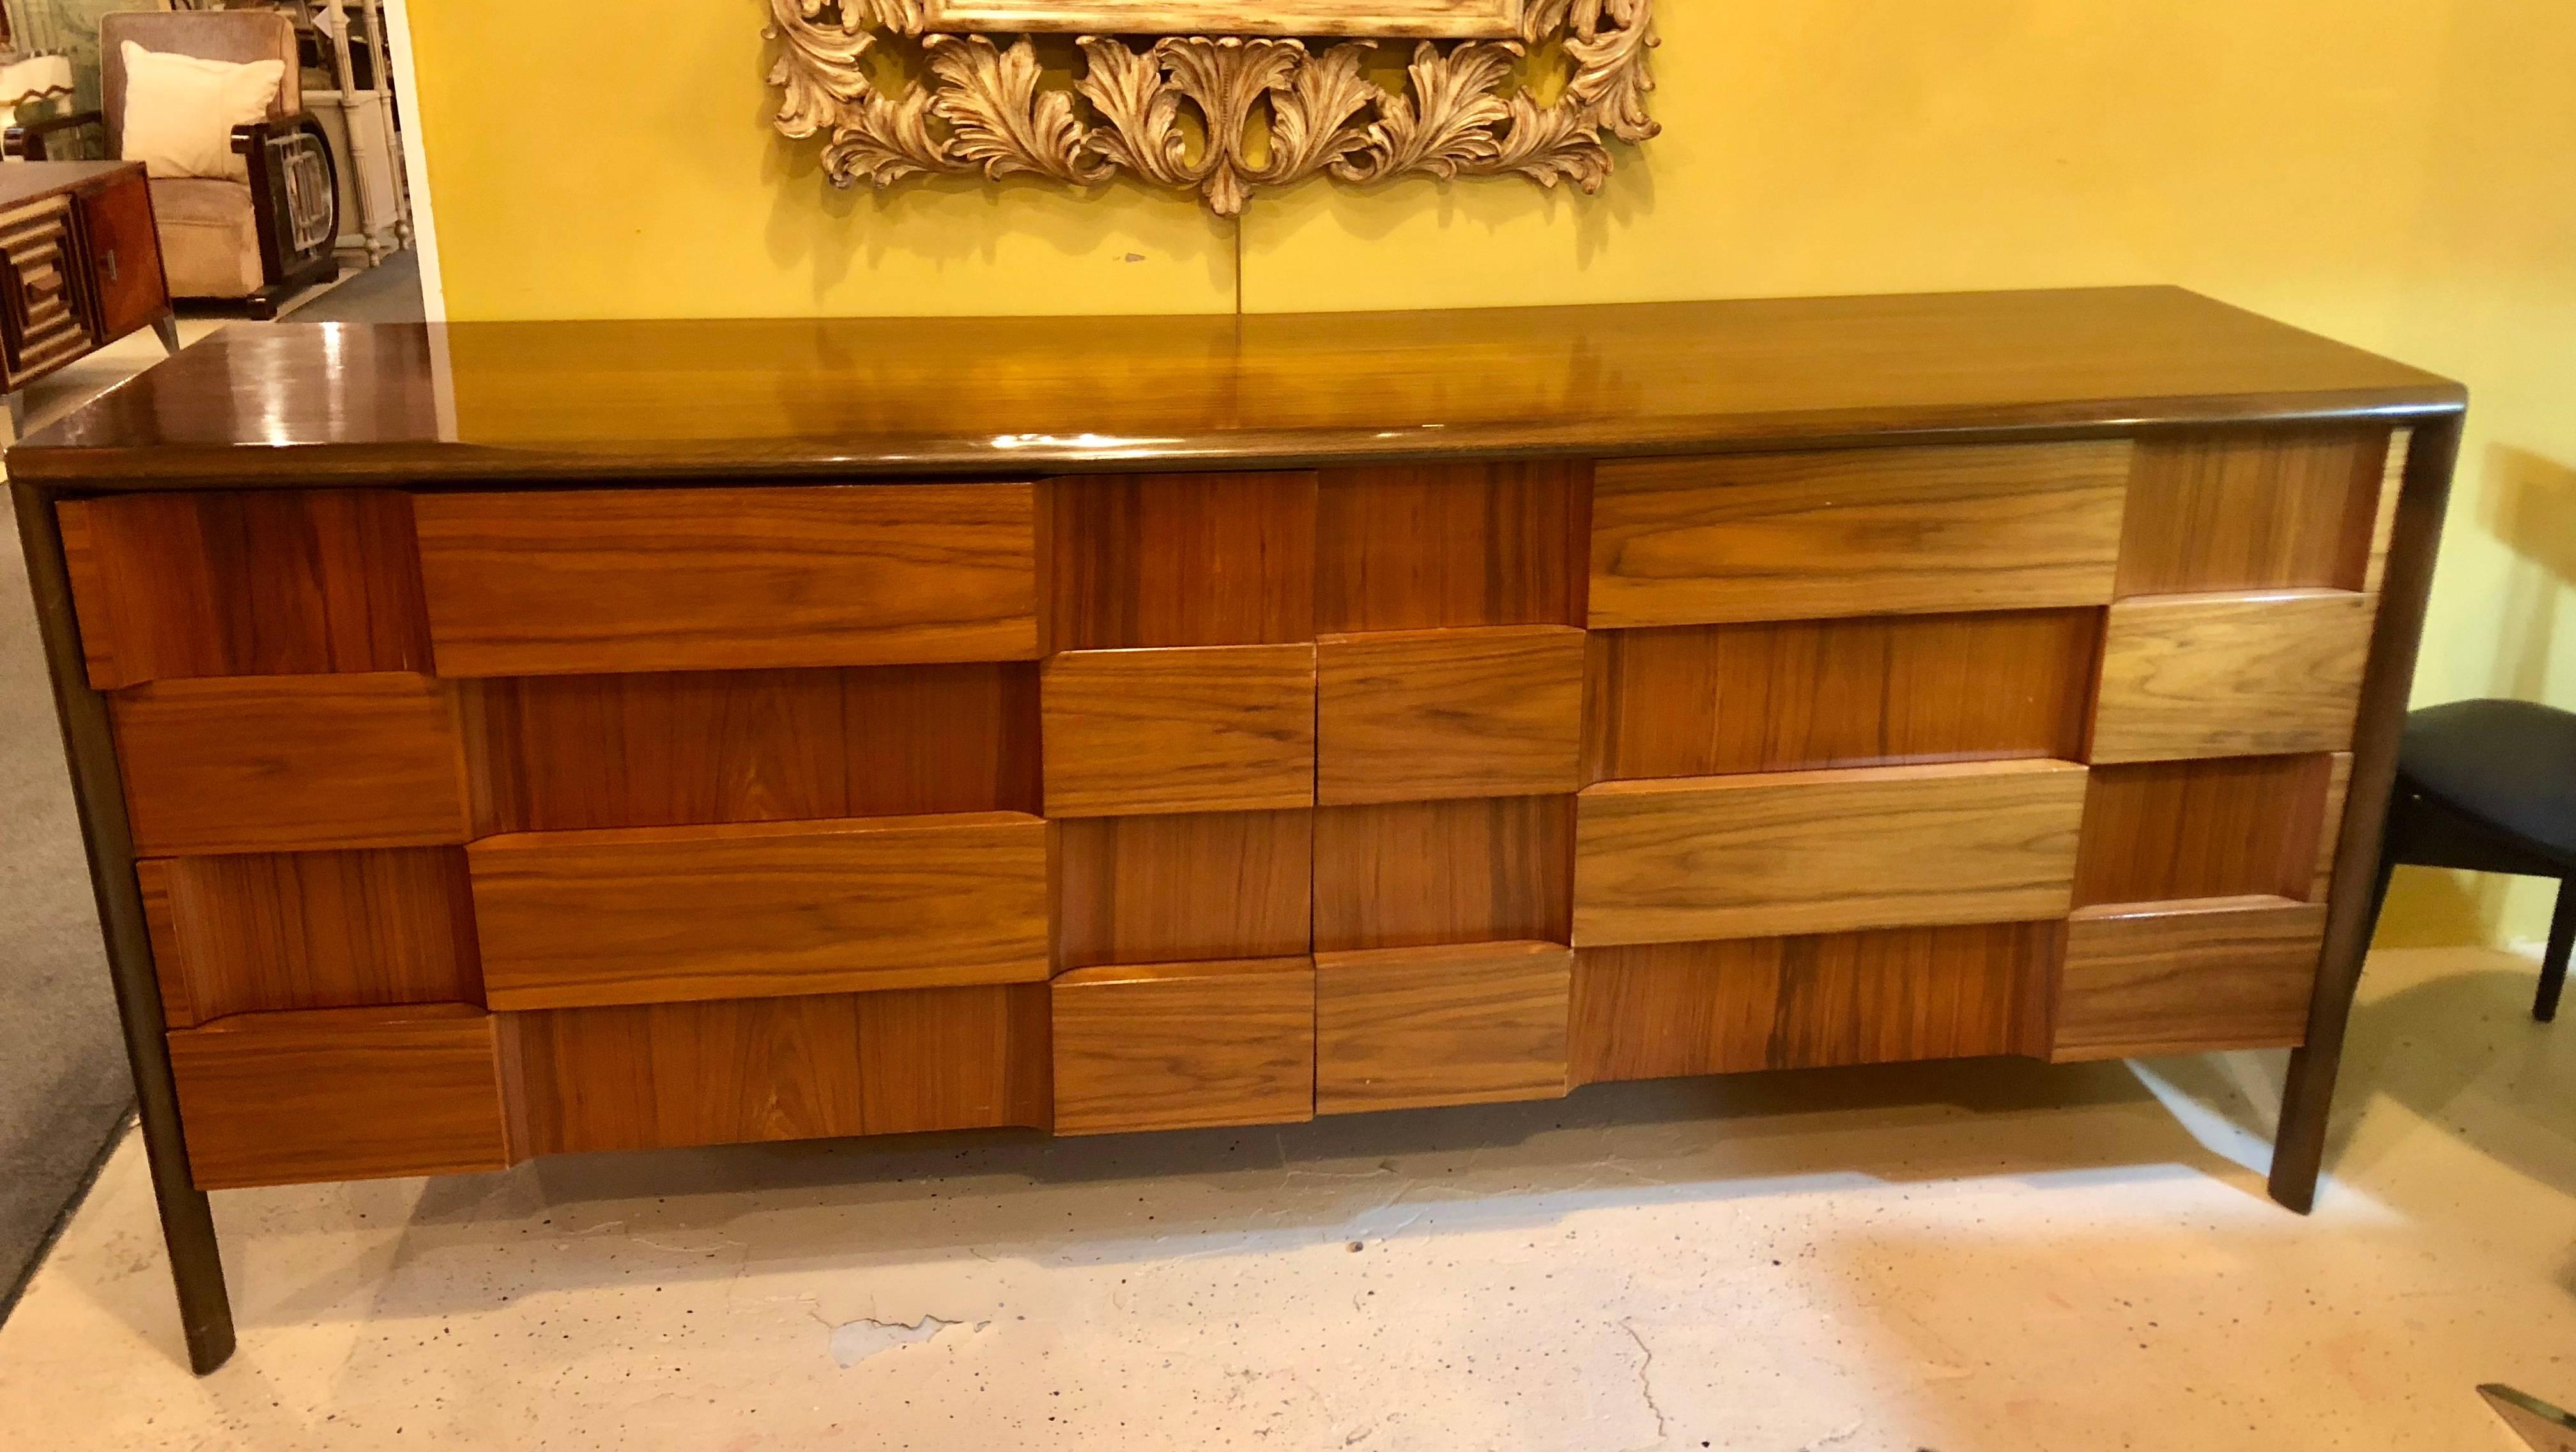 Edmond Spence Modernist credenza sideboard this stunning sculpted front side by side double commode or dresser by Edmond Spence features the stylish 